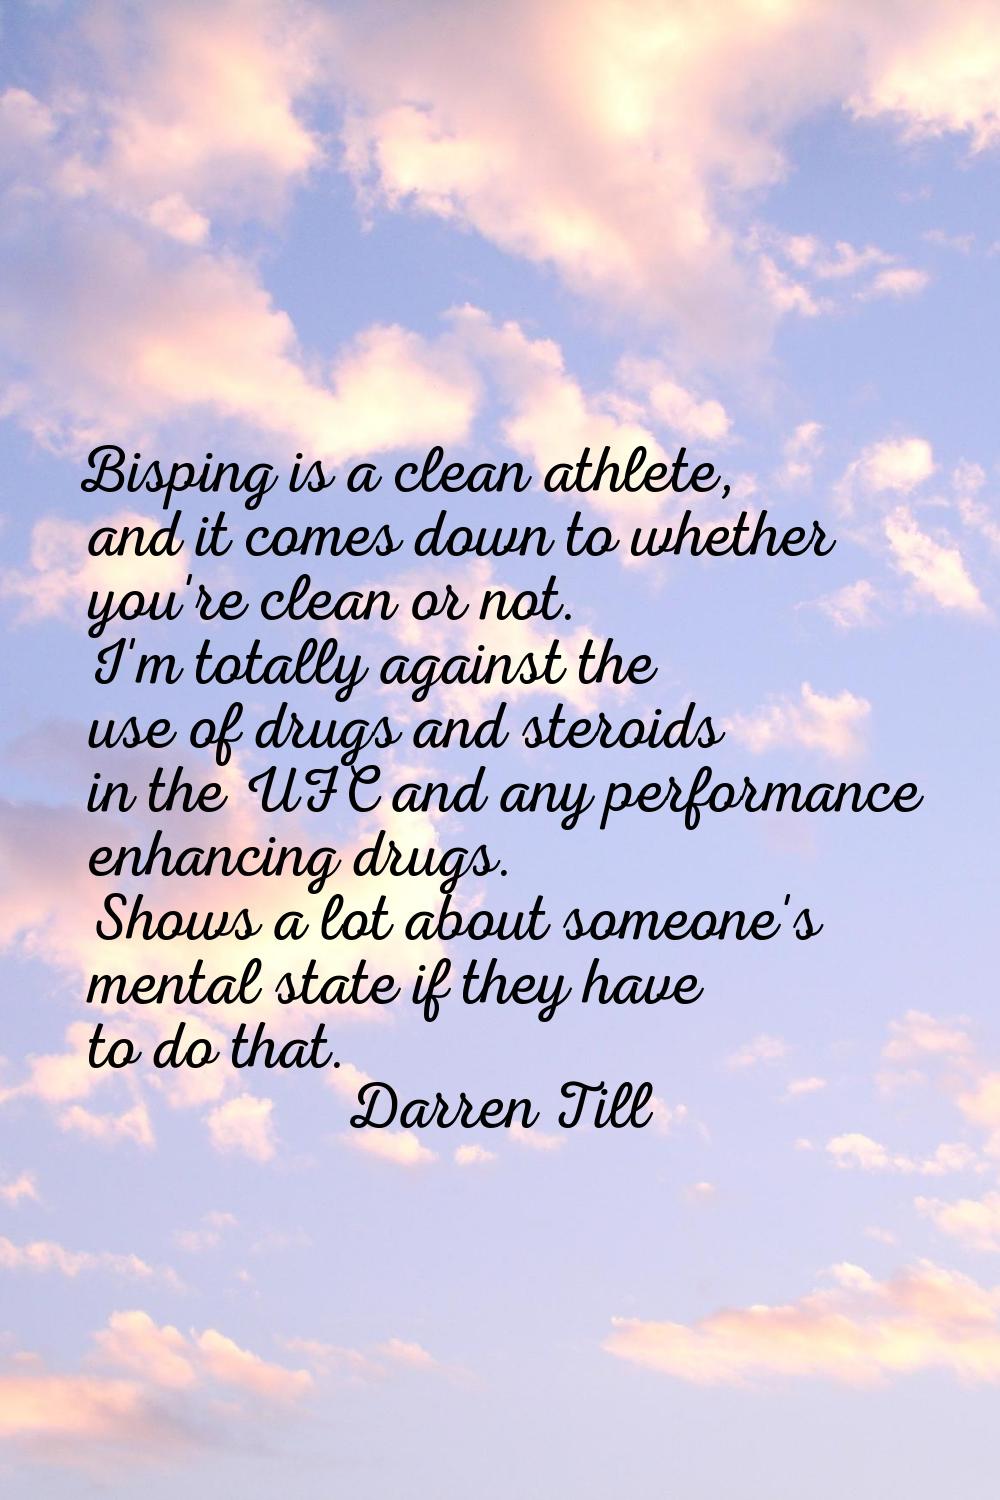 Bisping is a clean athlete, and it comes down to whether you're clean or not. I'm totally against t